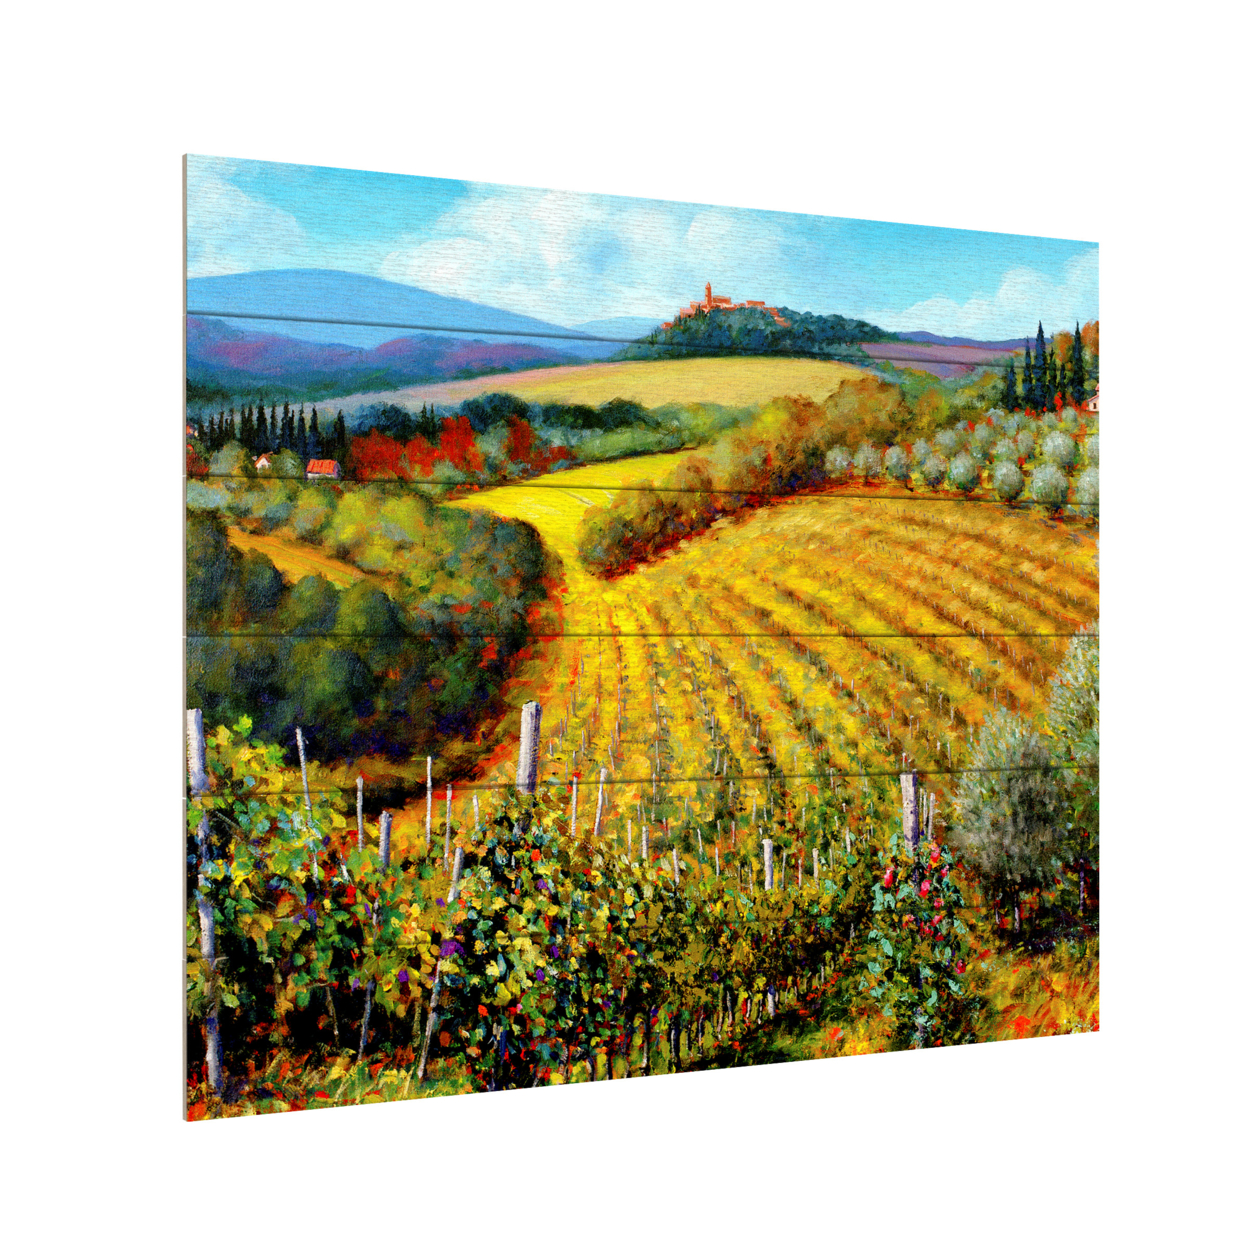 Wooden Slat Art 18 X 22 Inches Titled Chianti Vineyards Ready To Hang Home Decor Picture